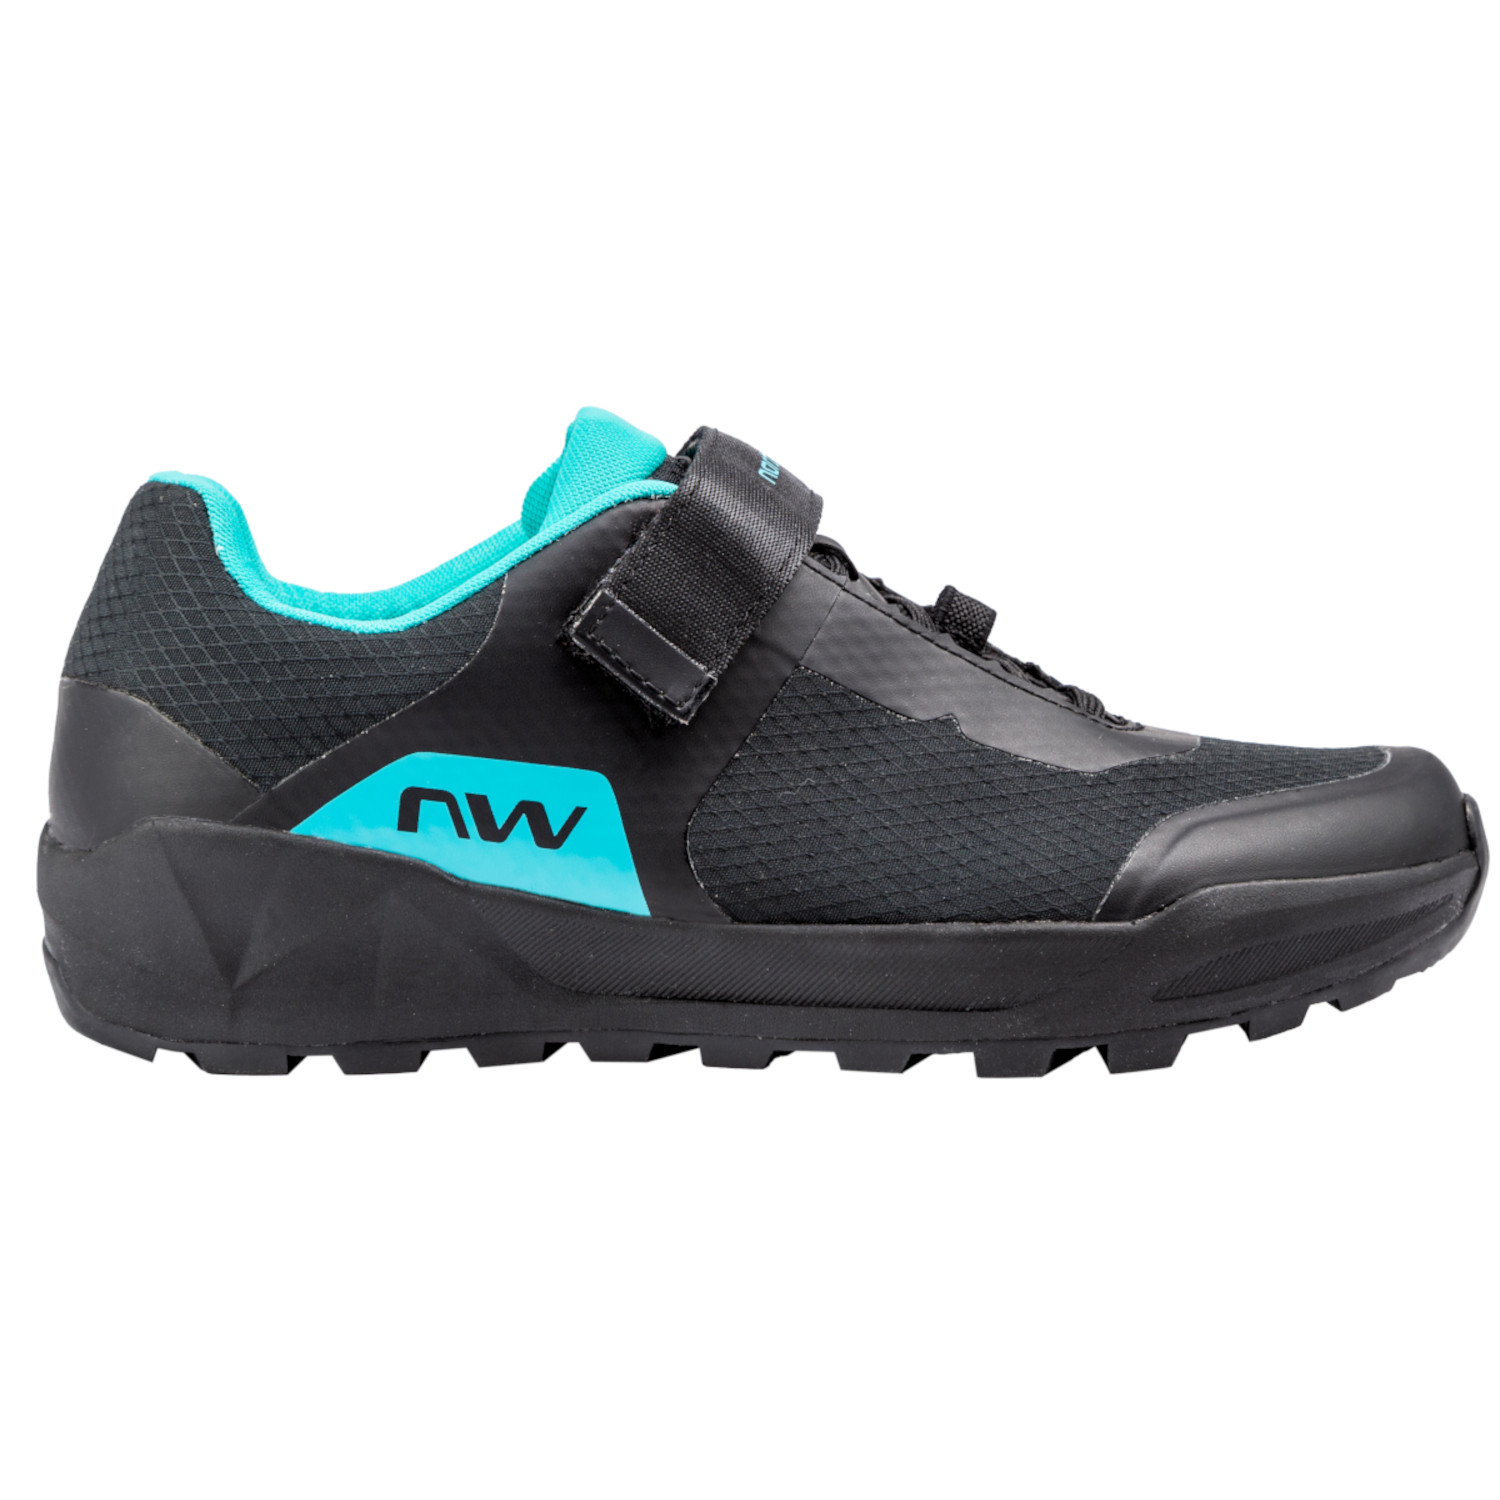 Picture of Northwave Escape Evo 2 All Terrain Shoes Women - black/turquoise 69